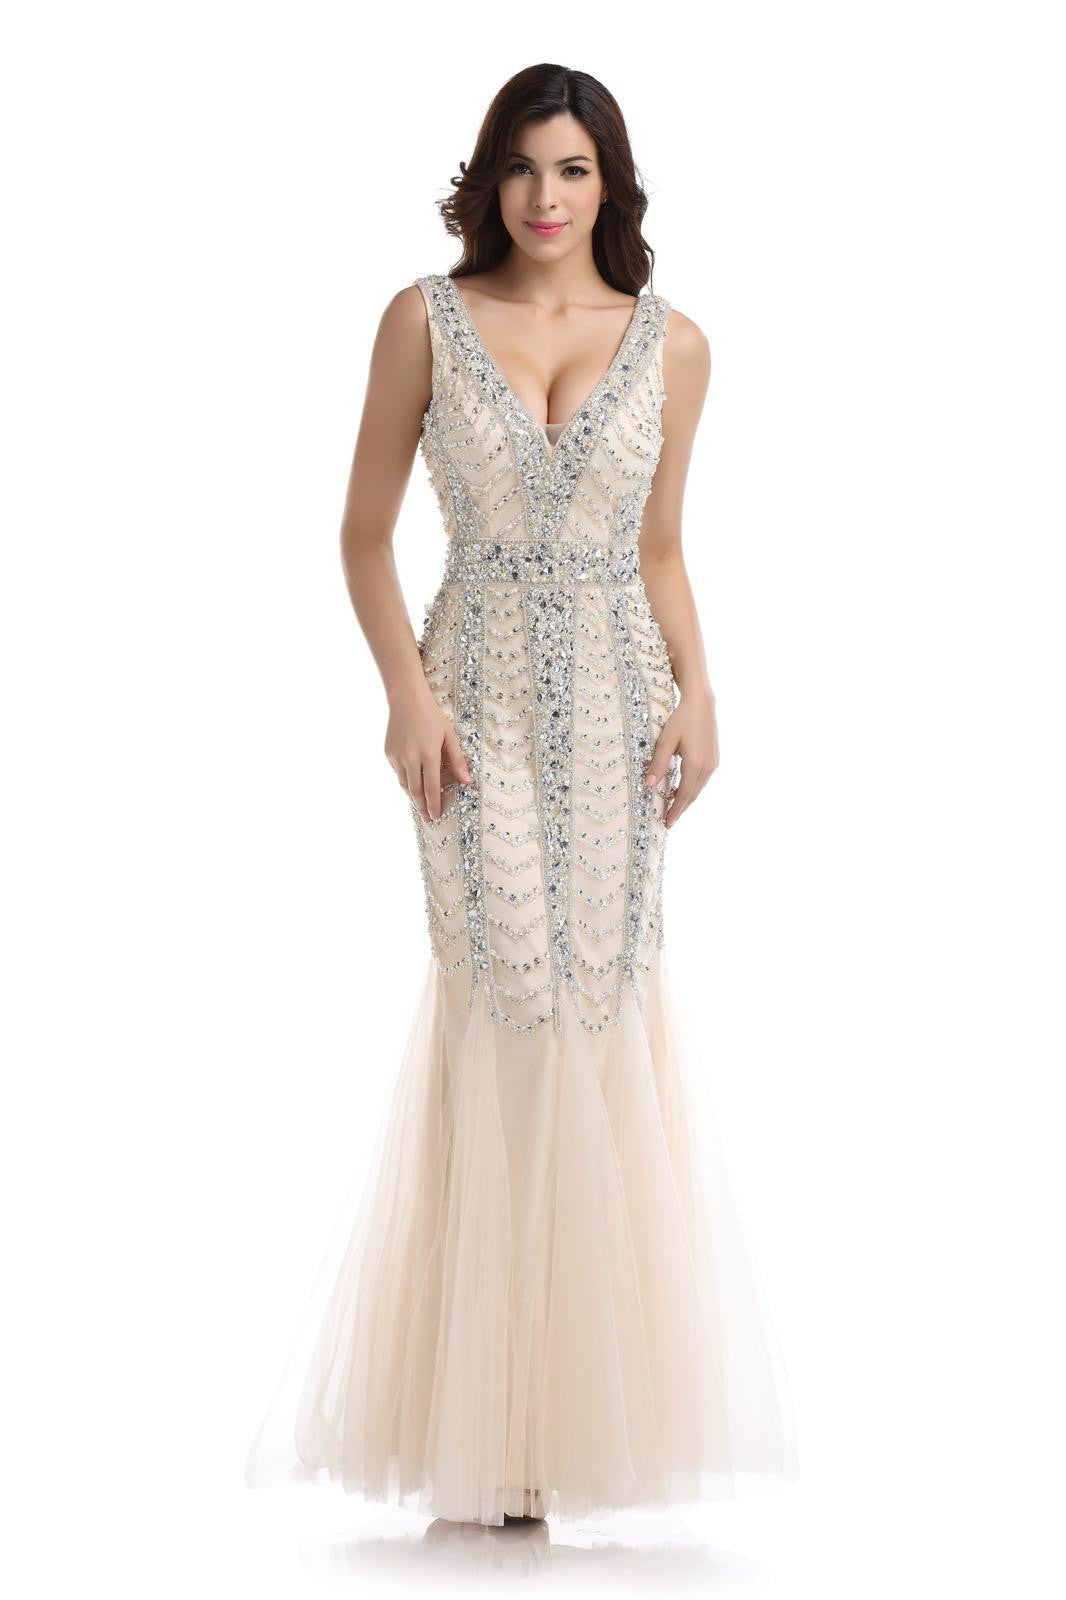 Crystal encrusted gown